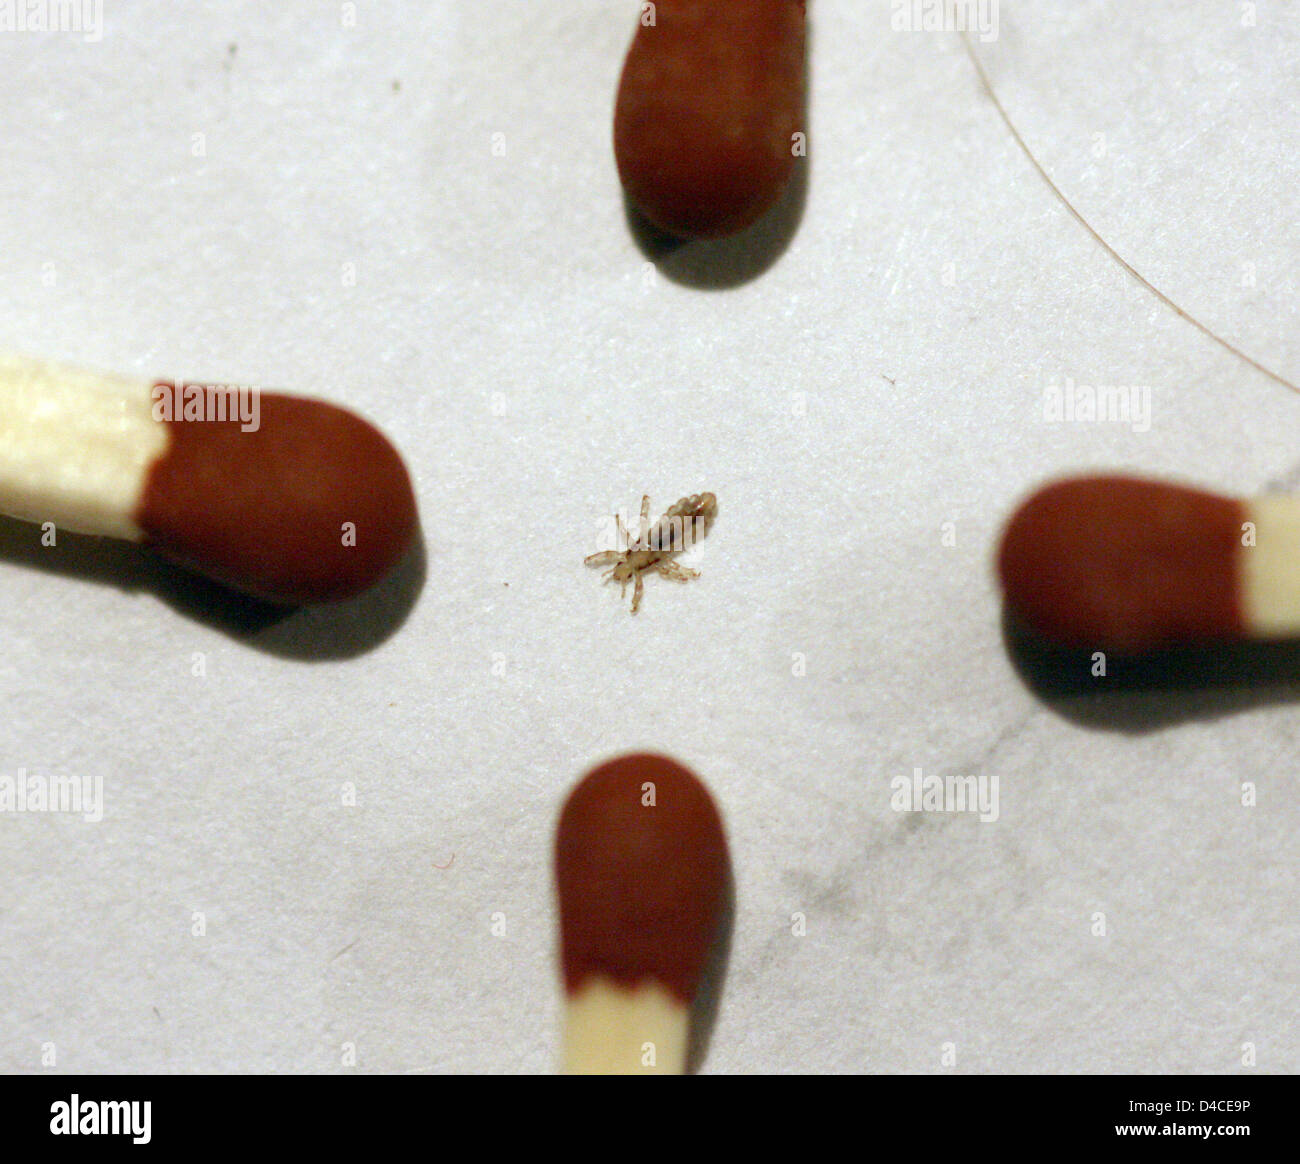 The photo depicts a head louse (R) (lat.: Pediculus humanus capitis) surrounded by four match heads in Freiburg, Germany, 16 Janaury 2008. Photo: Patrick Seeger Stock Photo